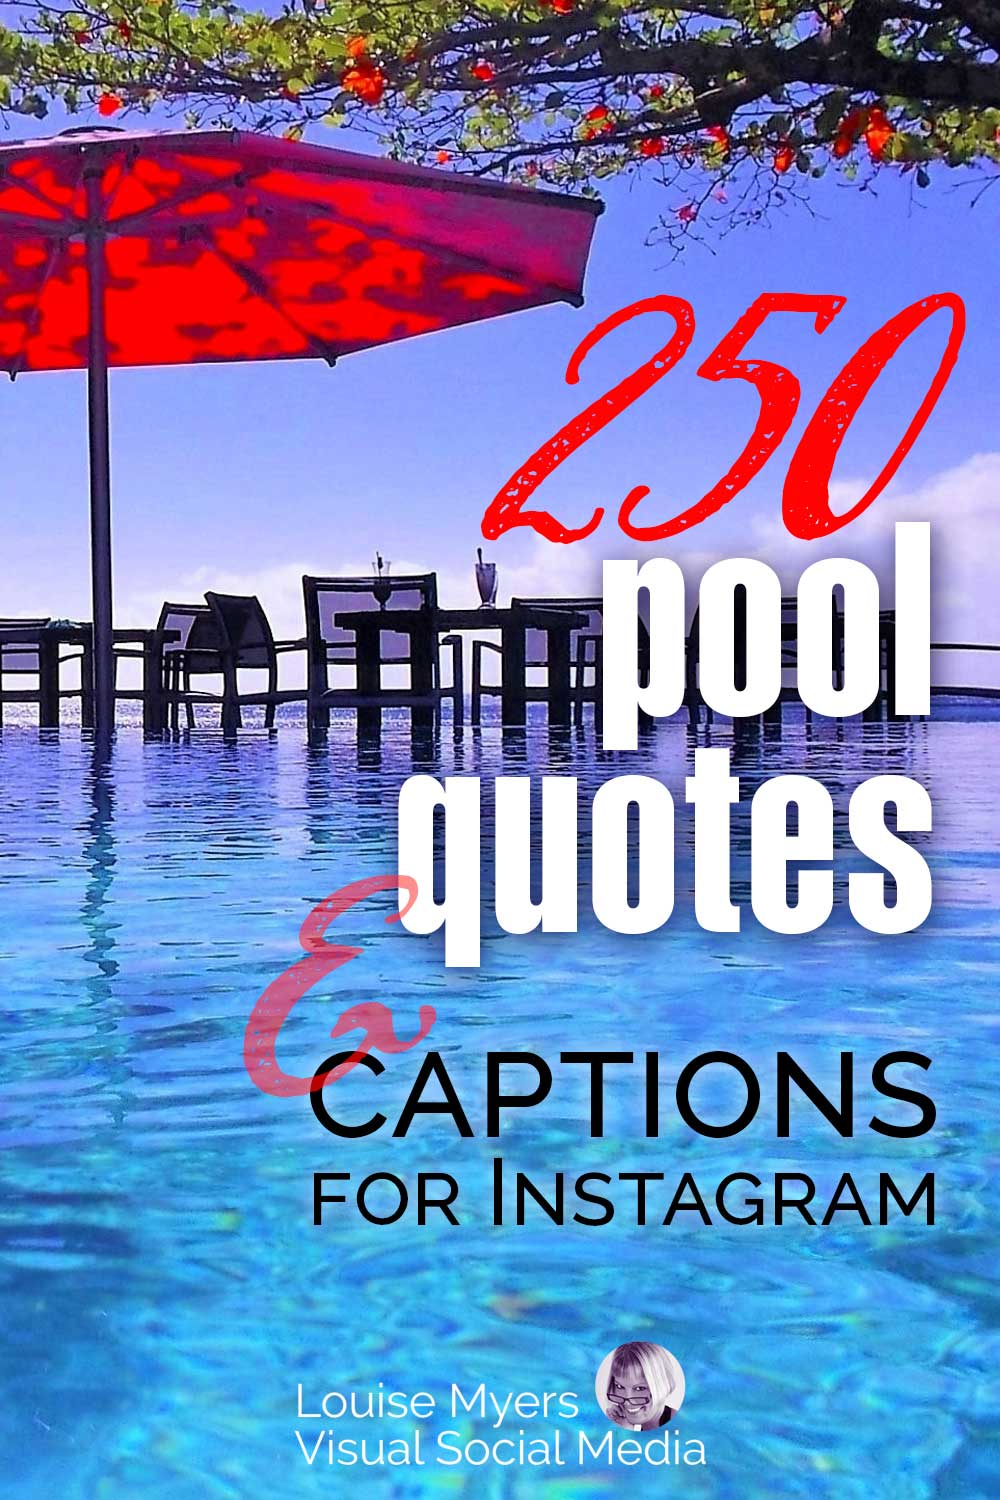 250 Pool Quotes & Captions for Instagram: Best Ways to Make a Splash! |  LouiseM